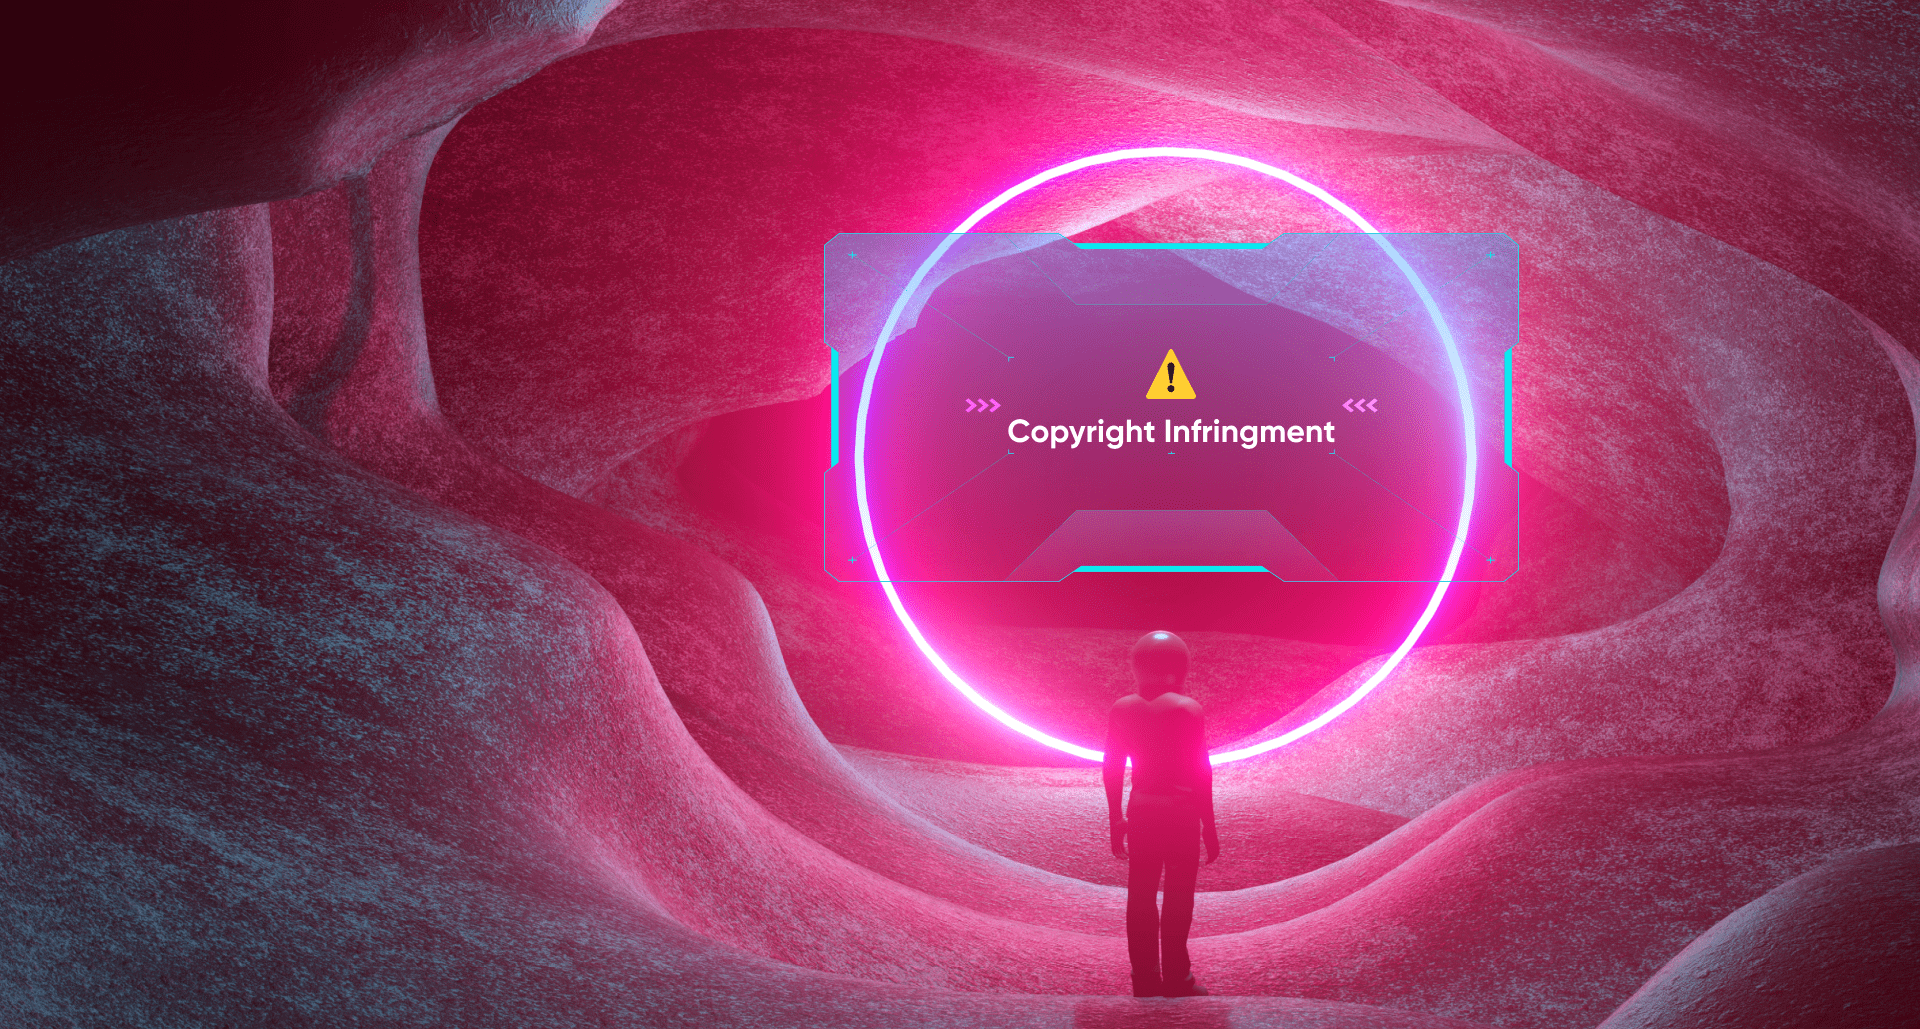 Content moderation services can identify and flag instances of copyright infringement. This is demonstrated with an image showing an alien standing in front of an illuminated portal on an alien planet with an alert for copyright infringement.